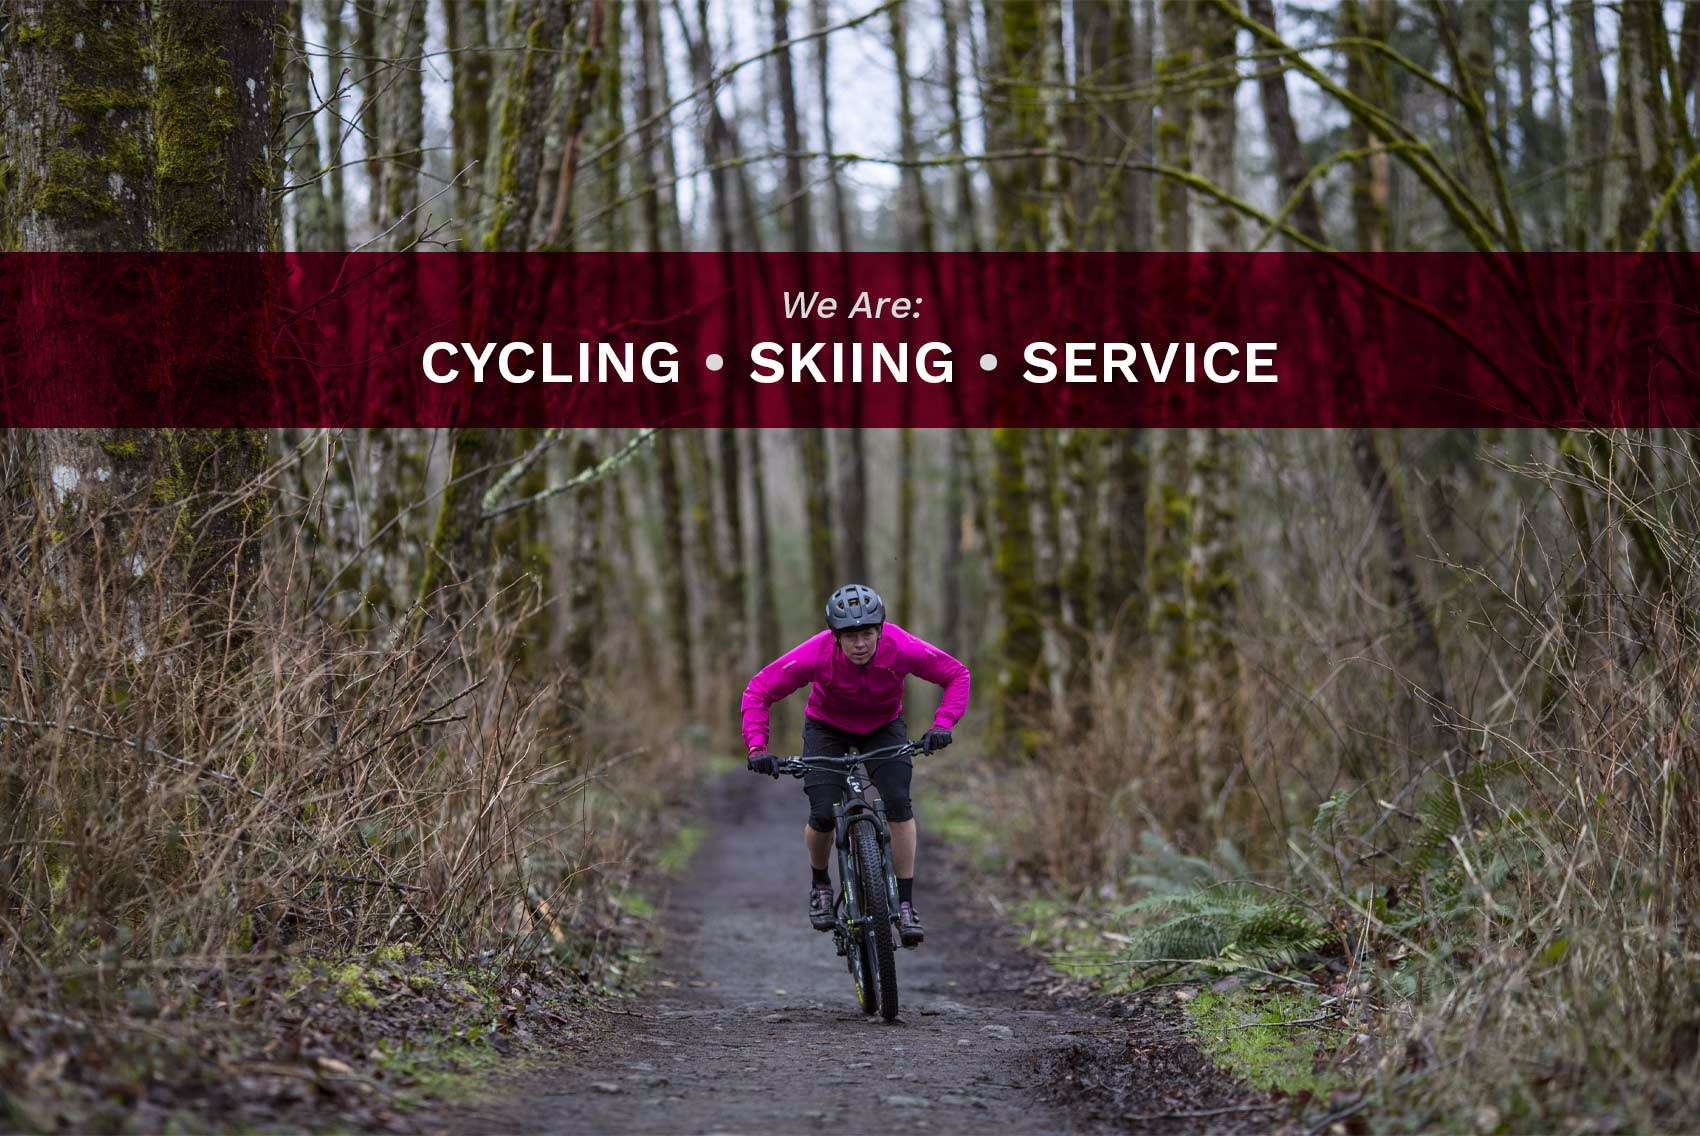 We Are: Cycling Skiing Service